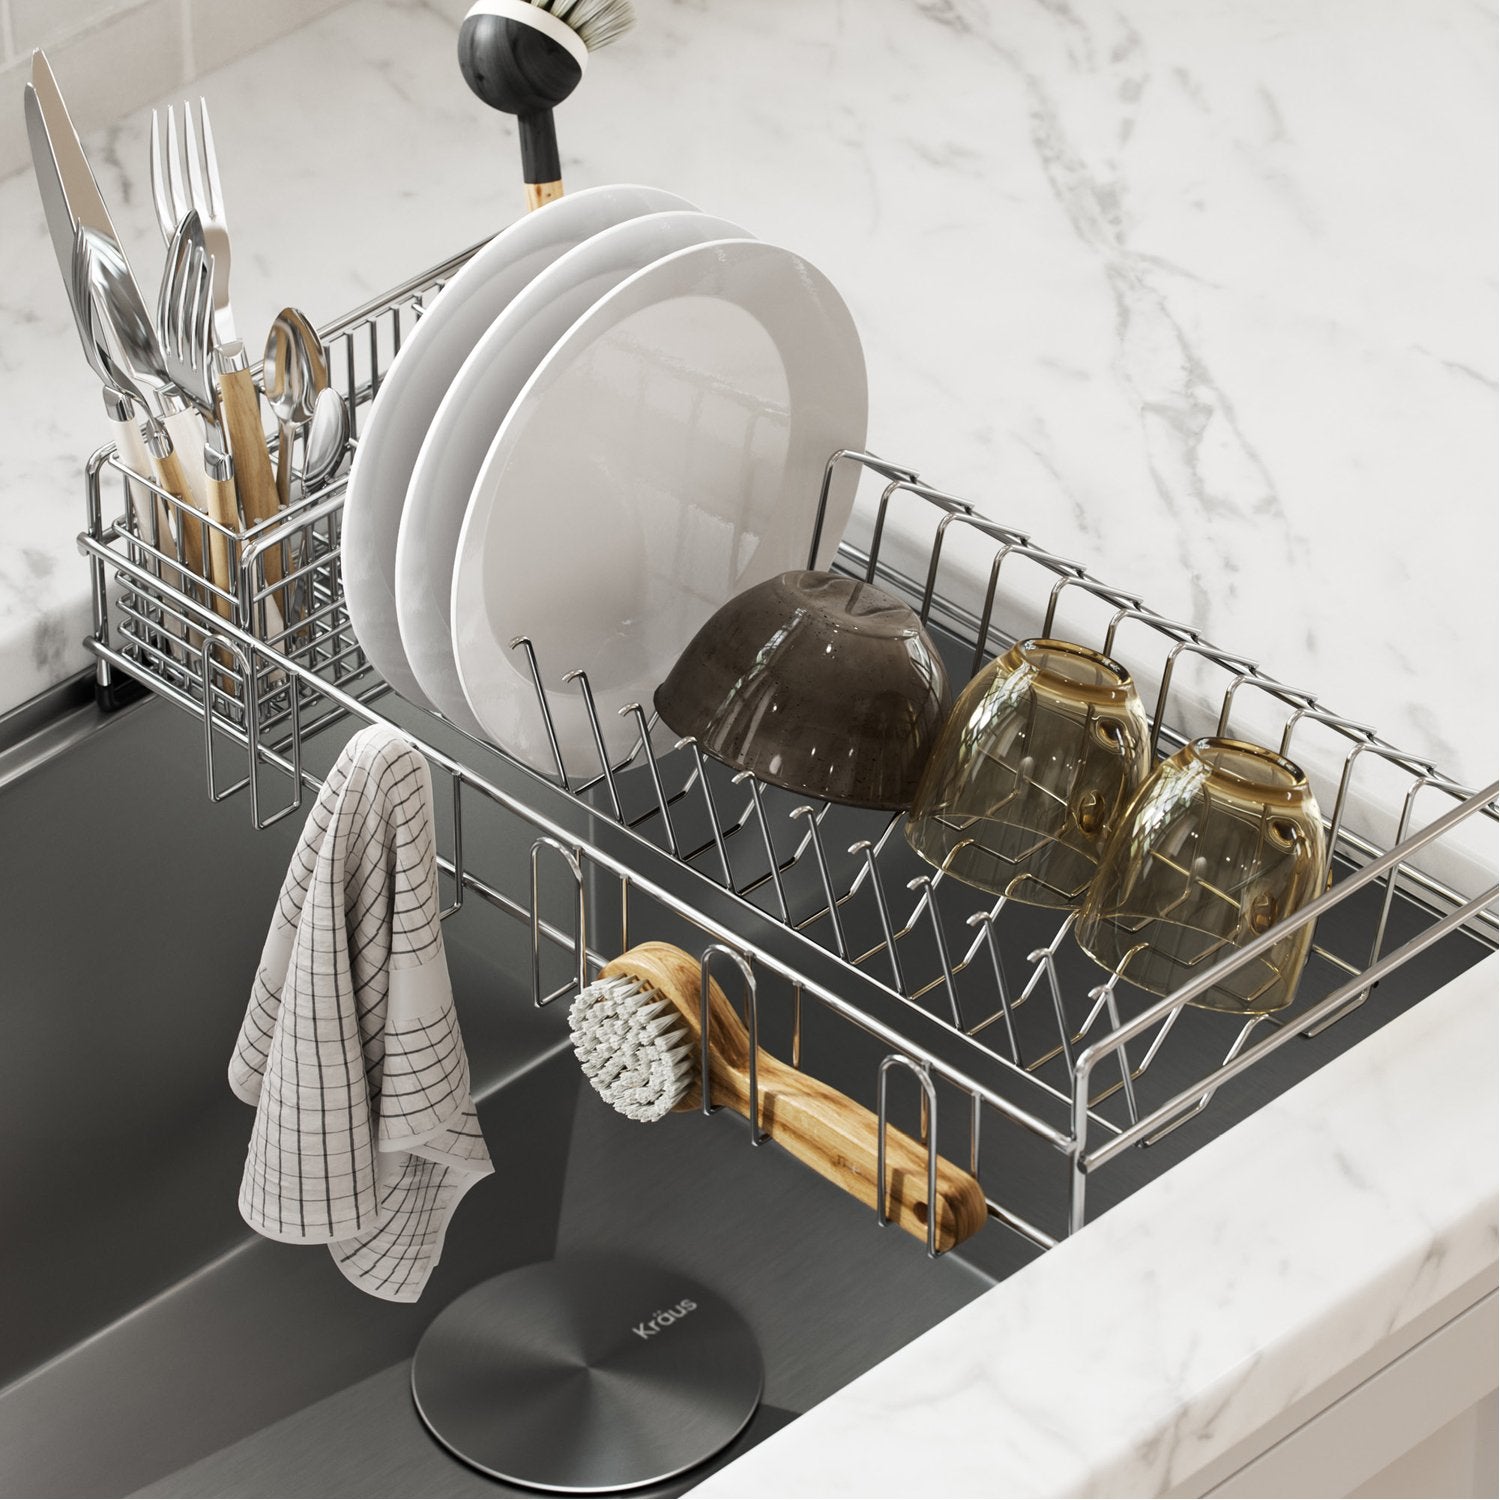 Optimized Product Title: Stainless Steel Over The Sink Dish Rack